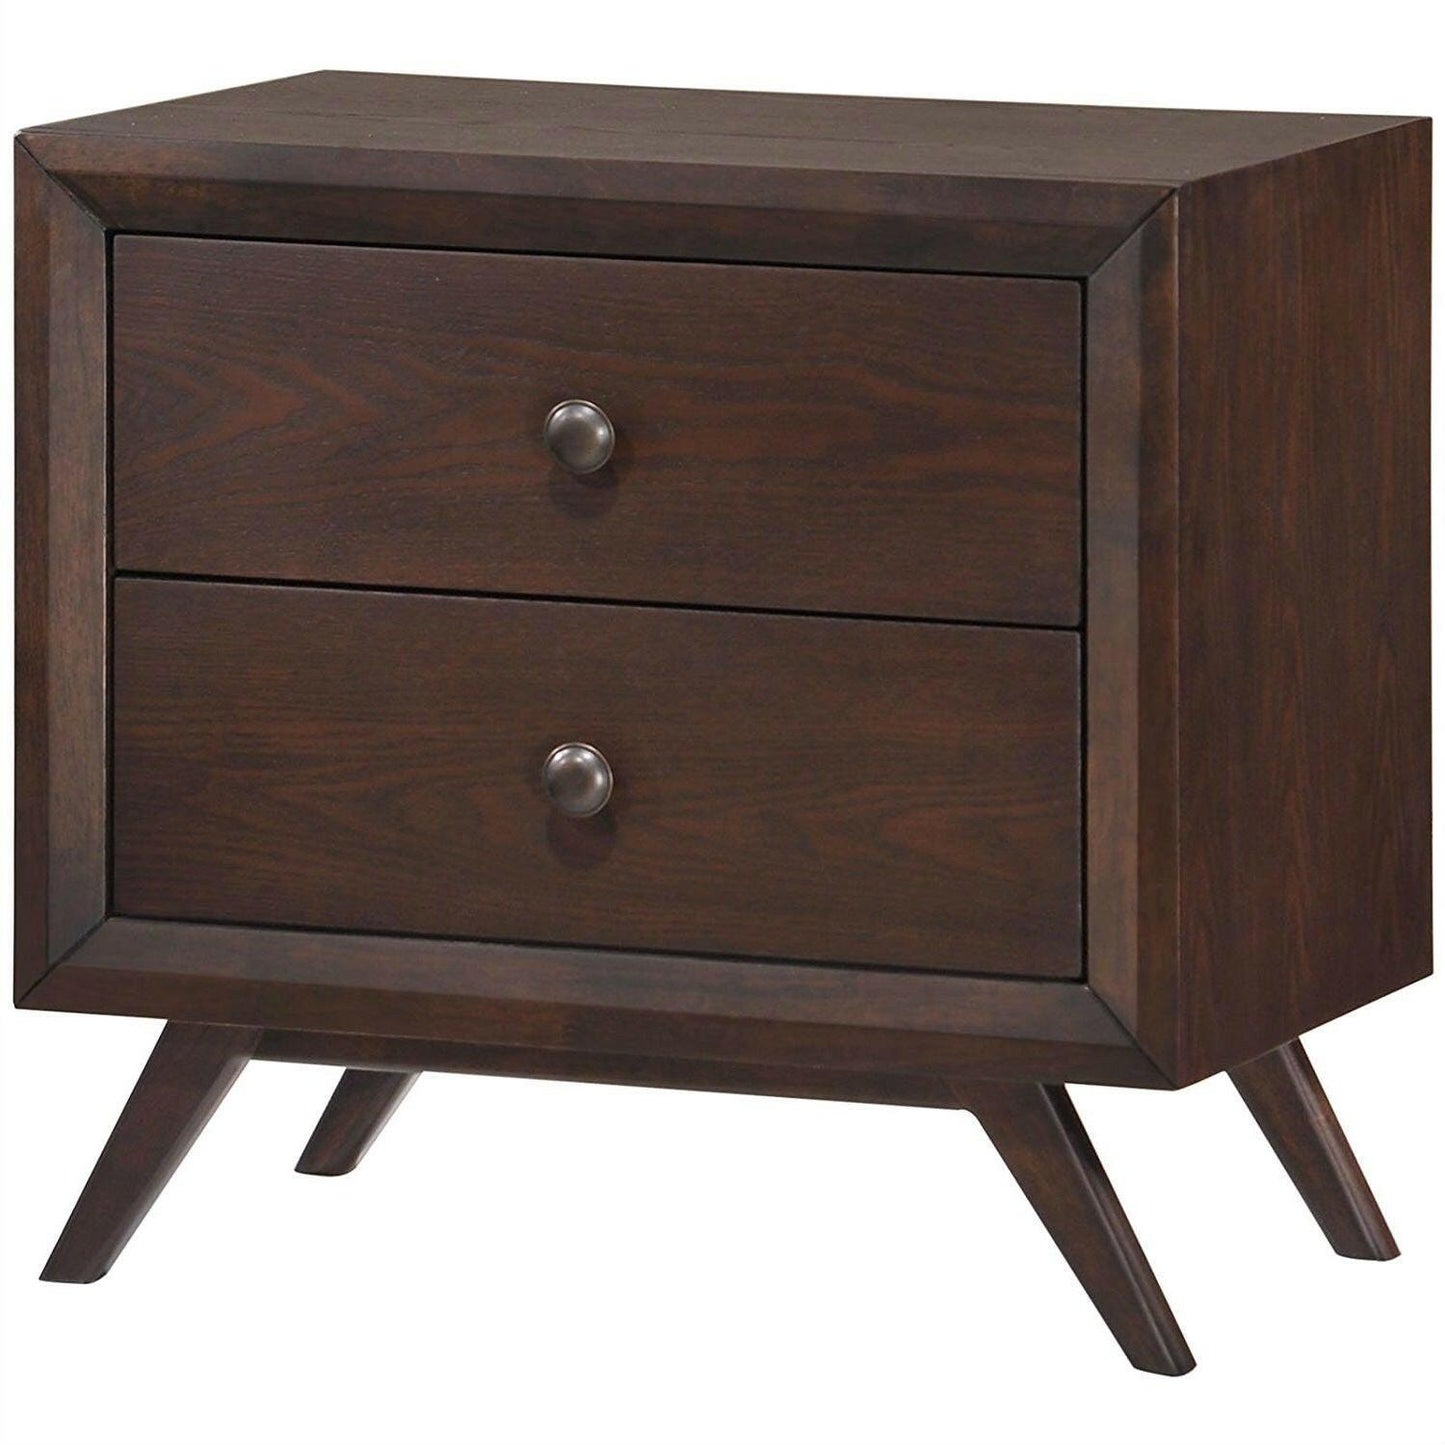 Mid-Century Modern Style End Table Nightstand in Cappuccino Wood Finish - FurniFindUSA